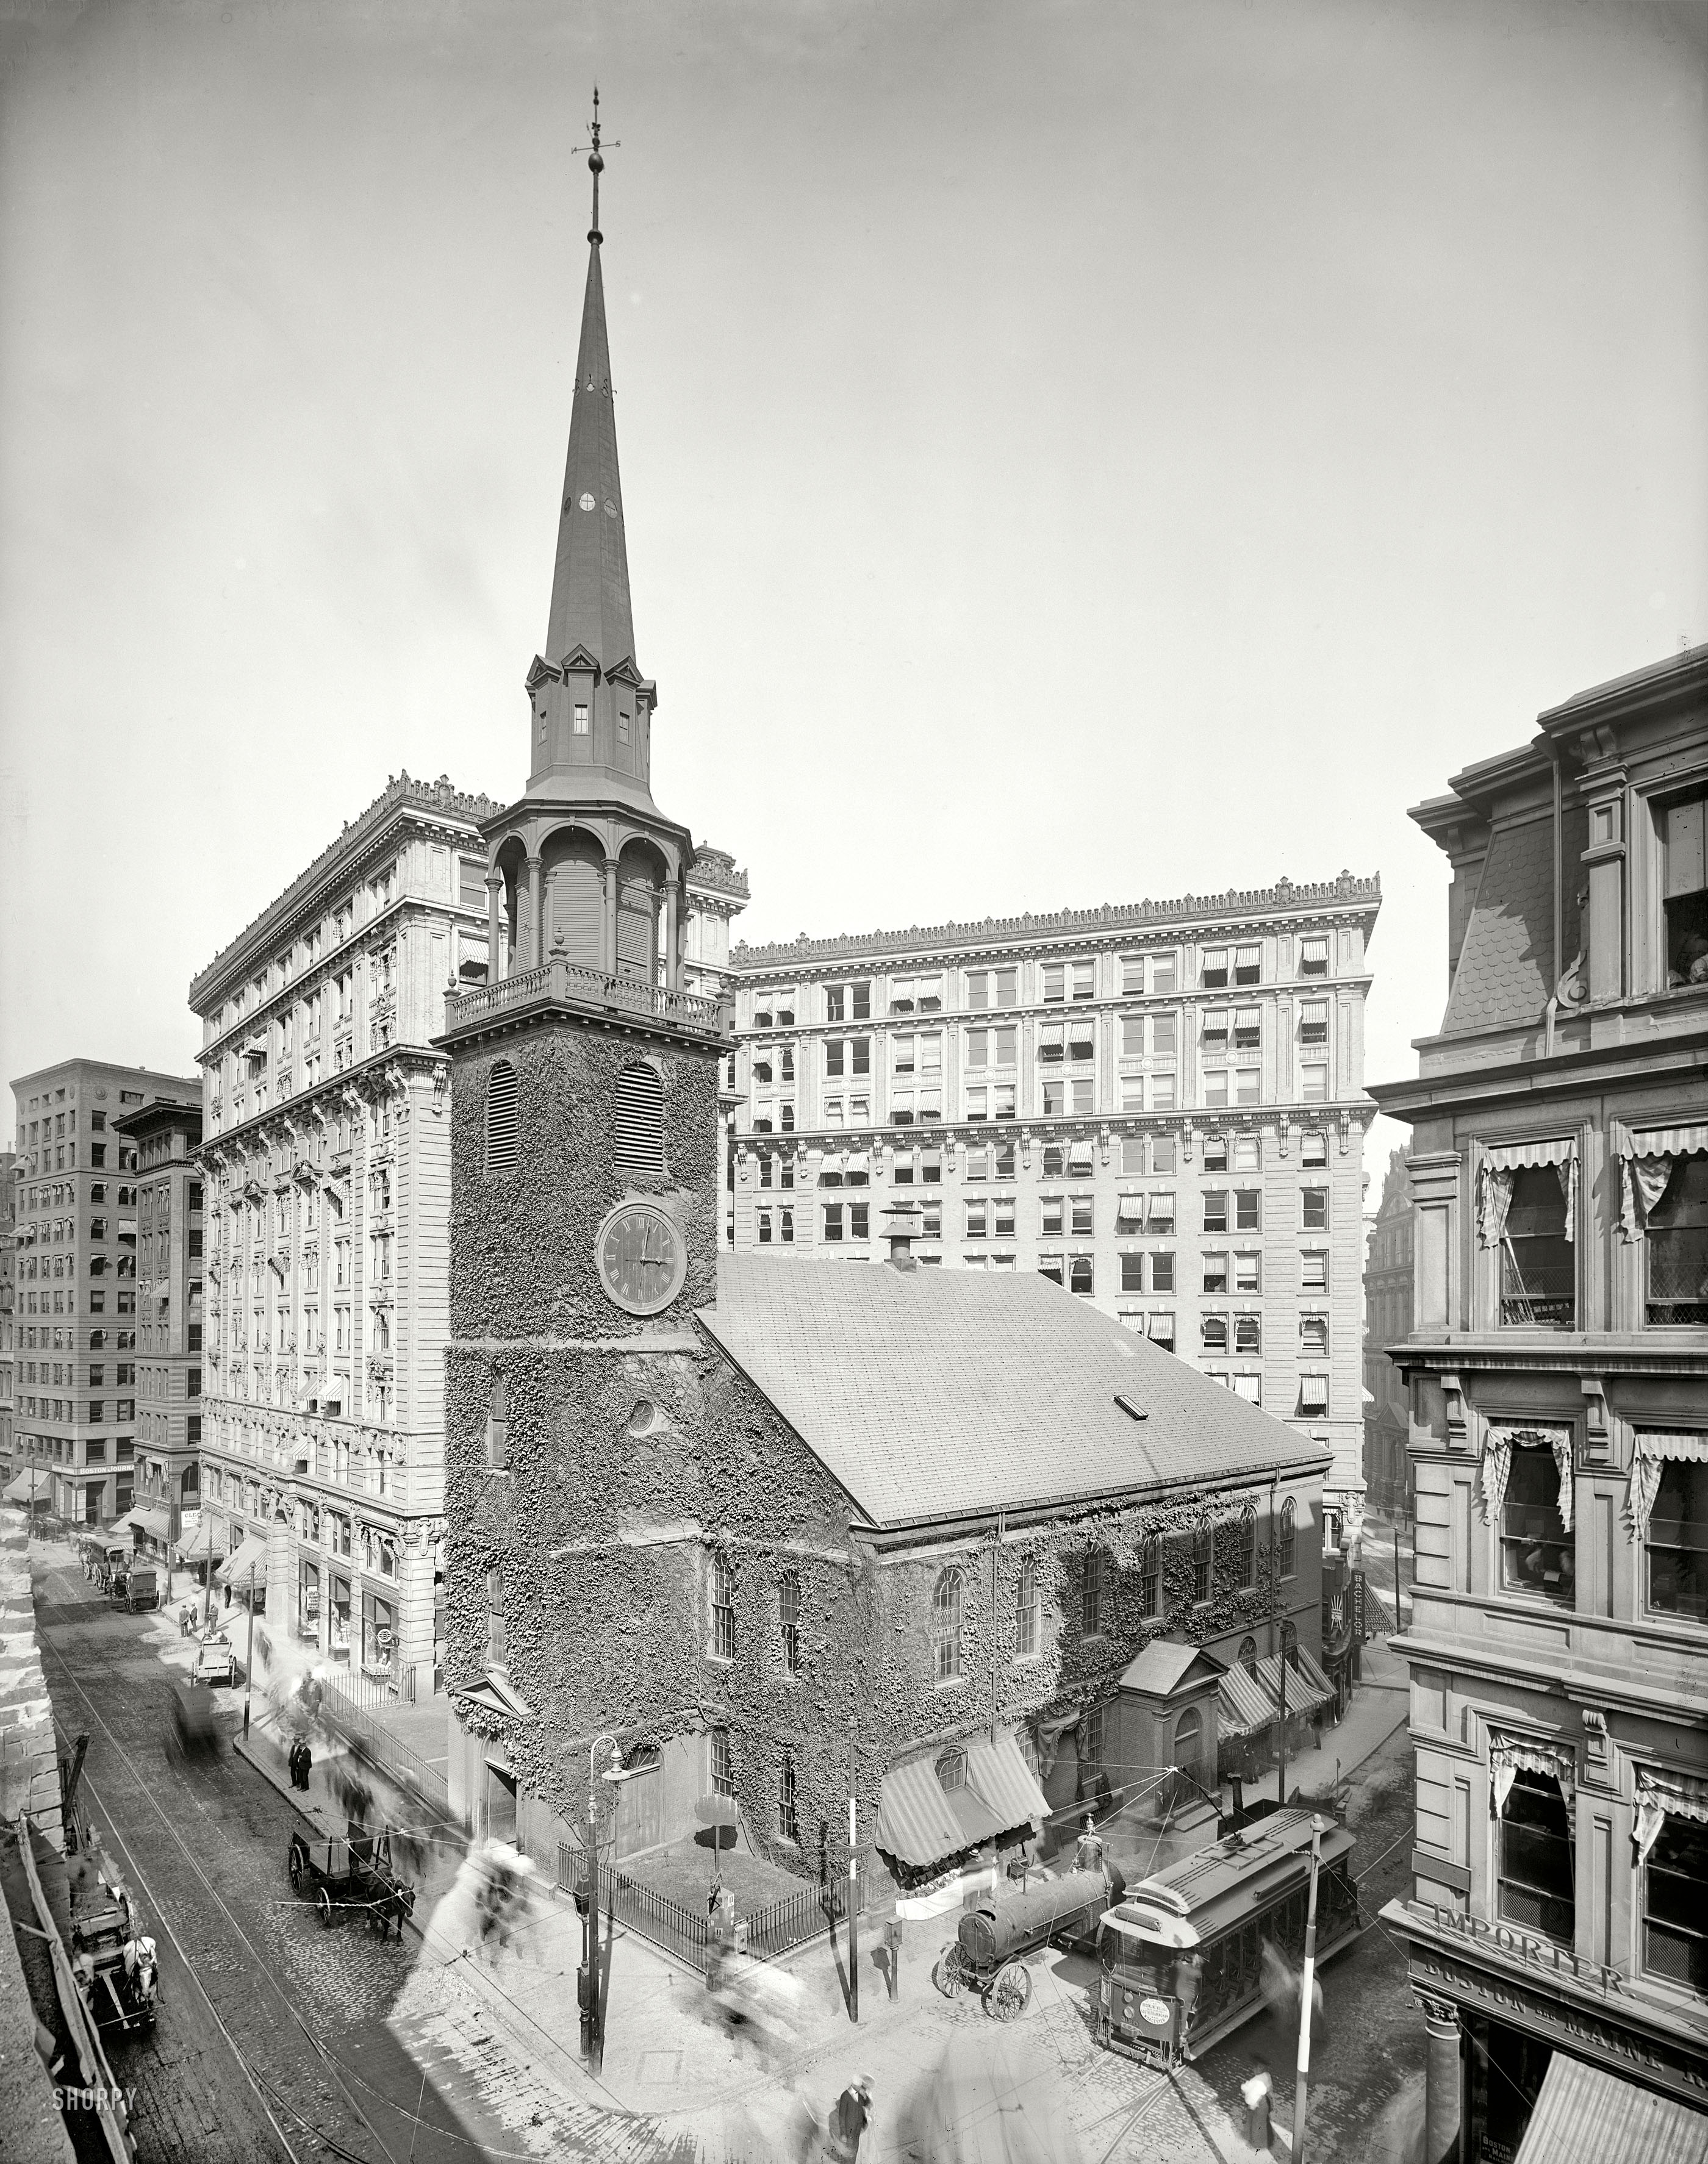 Boston circa 1905. "Old South Meeting House & Old South Building." 8x10 inch dry plate glass negative, Detroit Publishing Company. View full size.